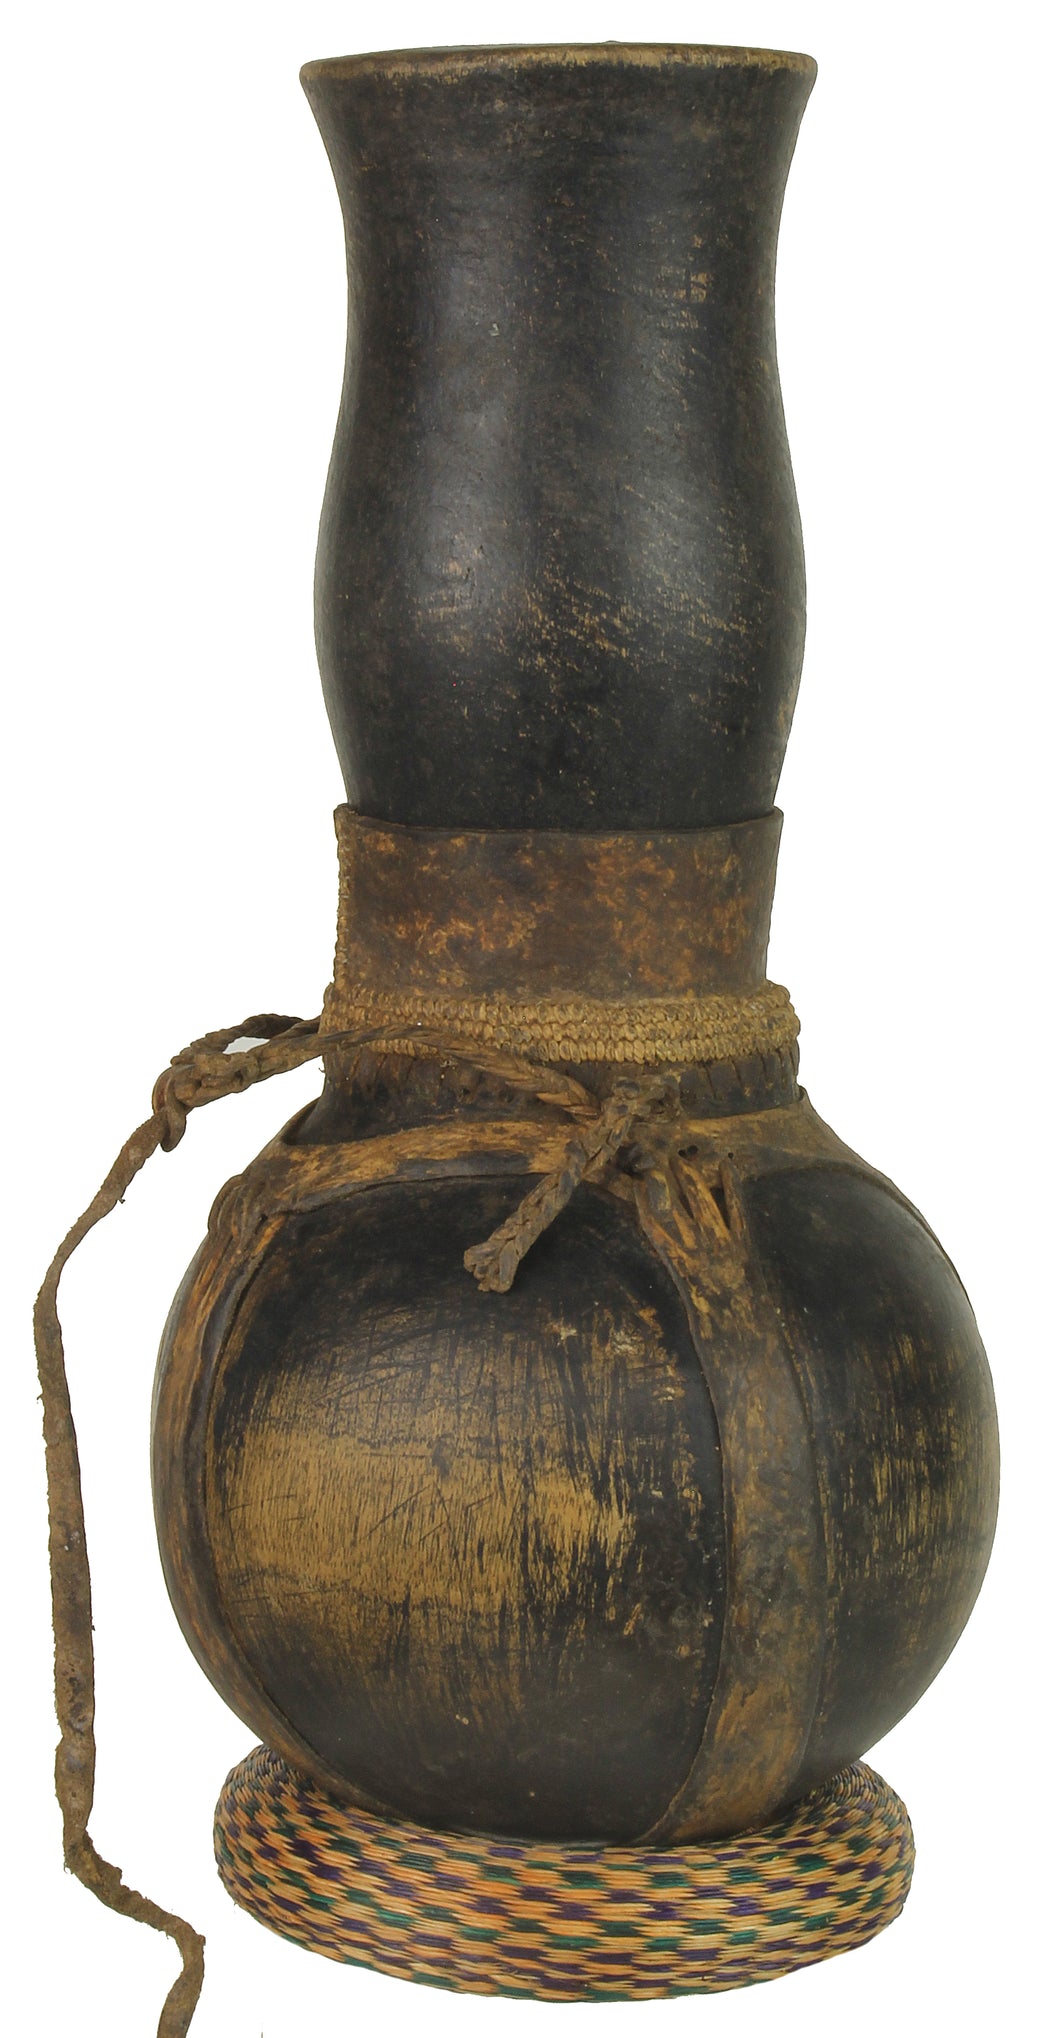 Vintage Wooden & Leather Milk Vessel from Congo, Africa | 14" - Niger Bend